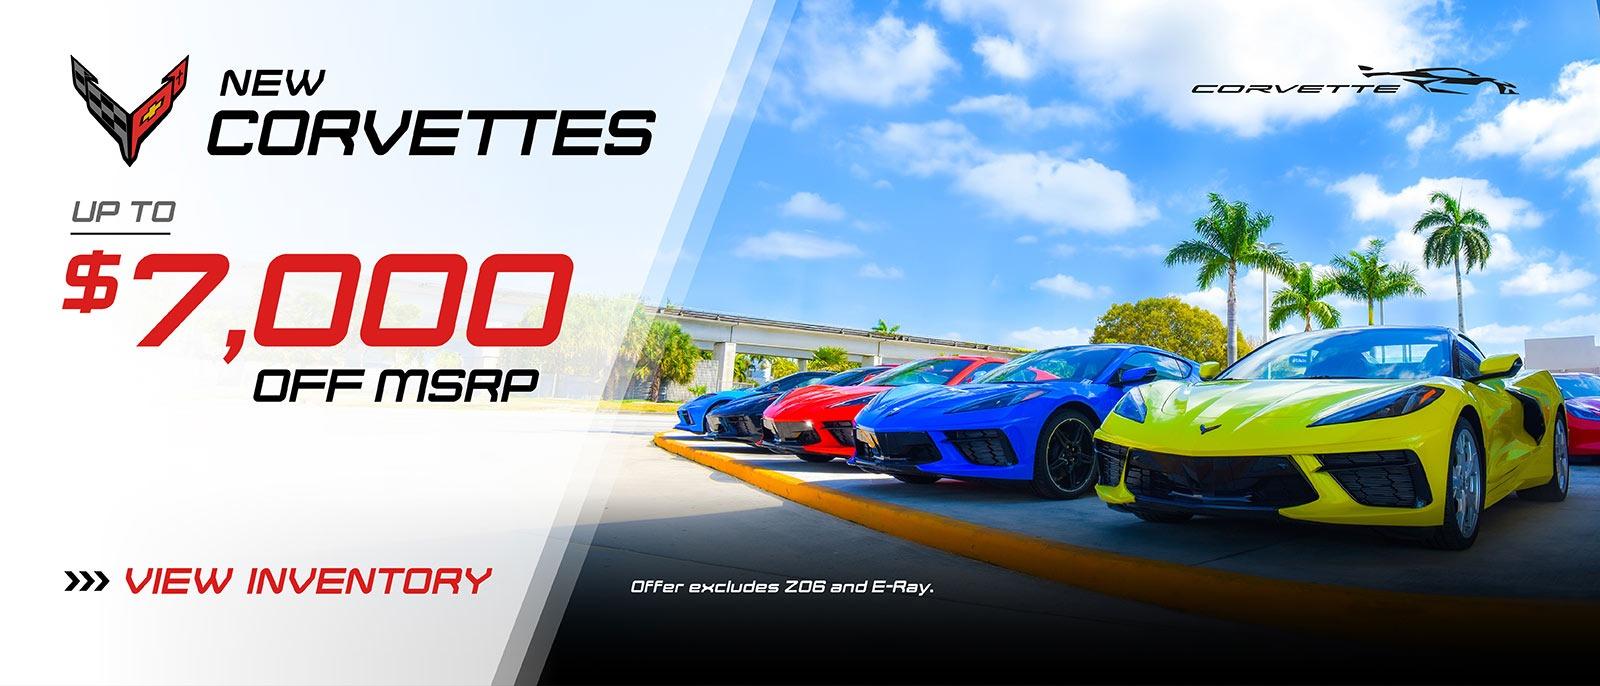 New Corvettes Up to $7000 off MSRP offer excludes Z06 and E-Ray